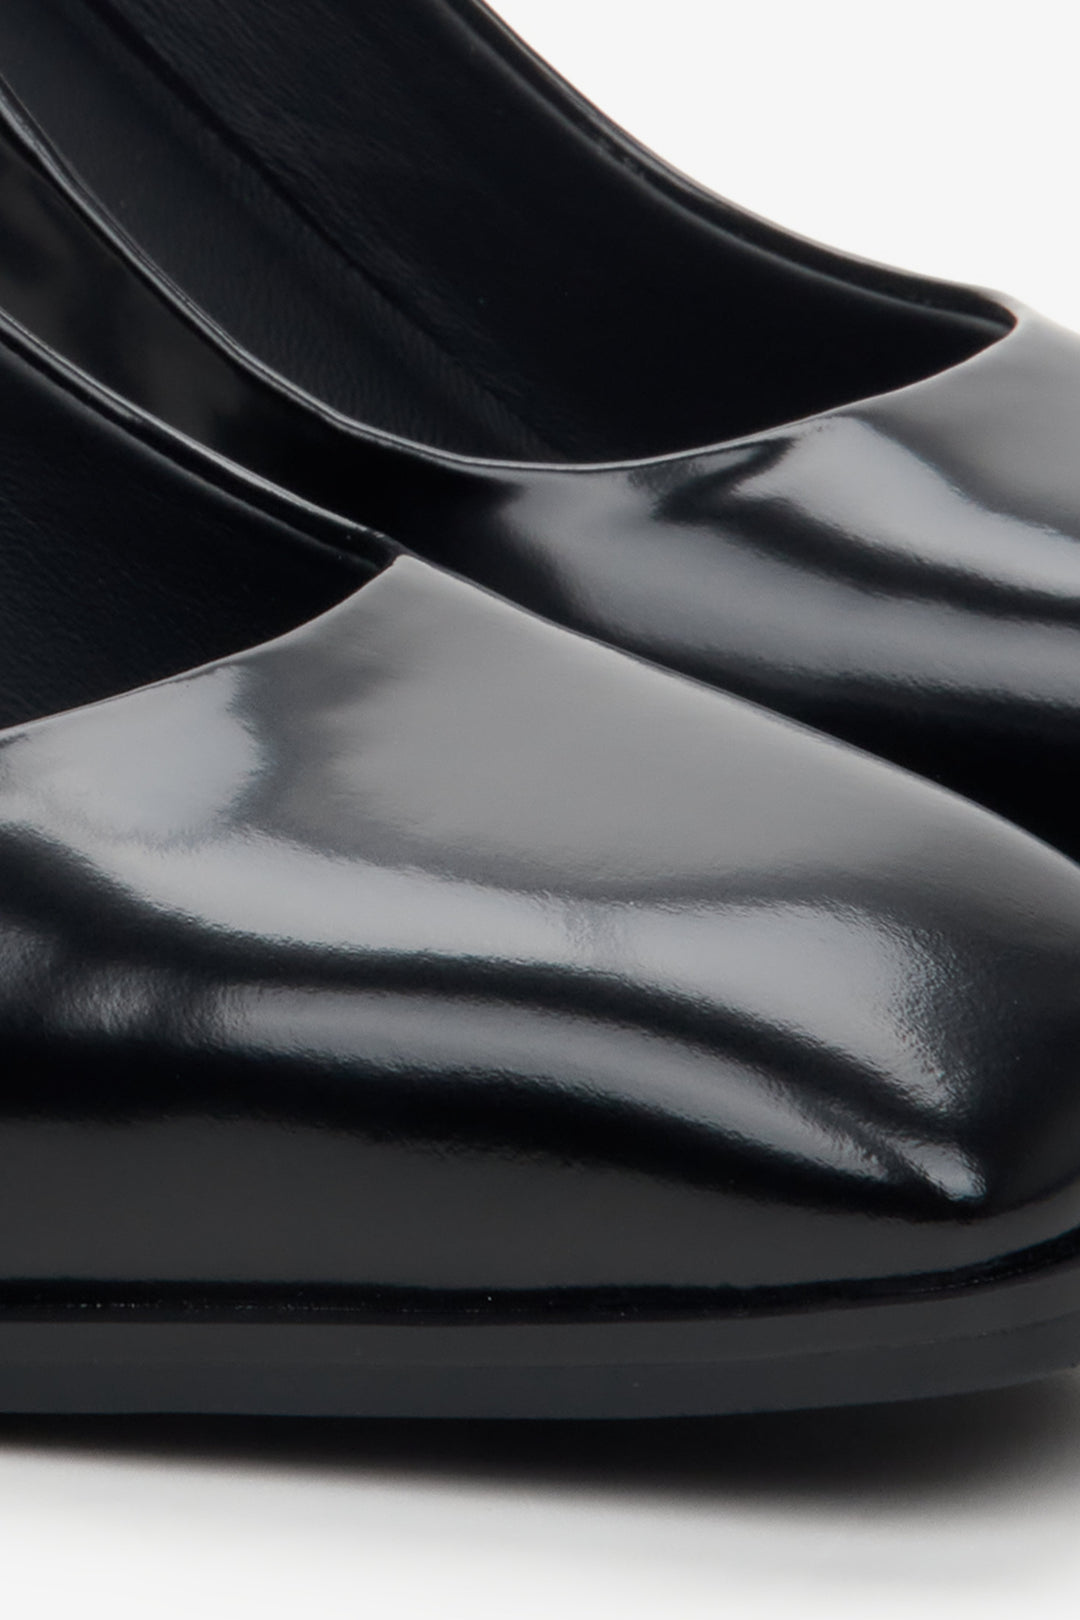 Women's leather high-heeled shoes - close-up on details.